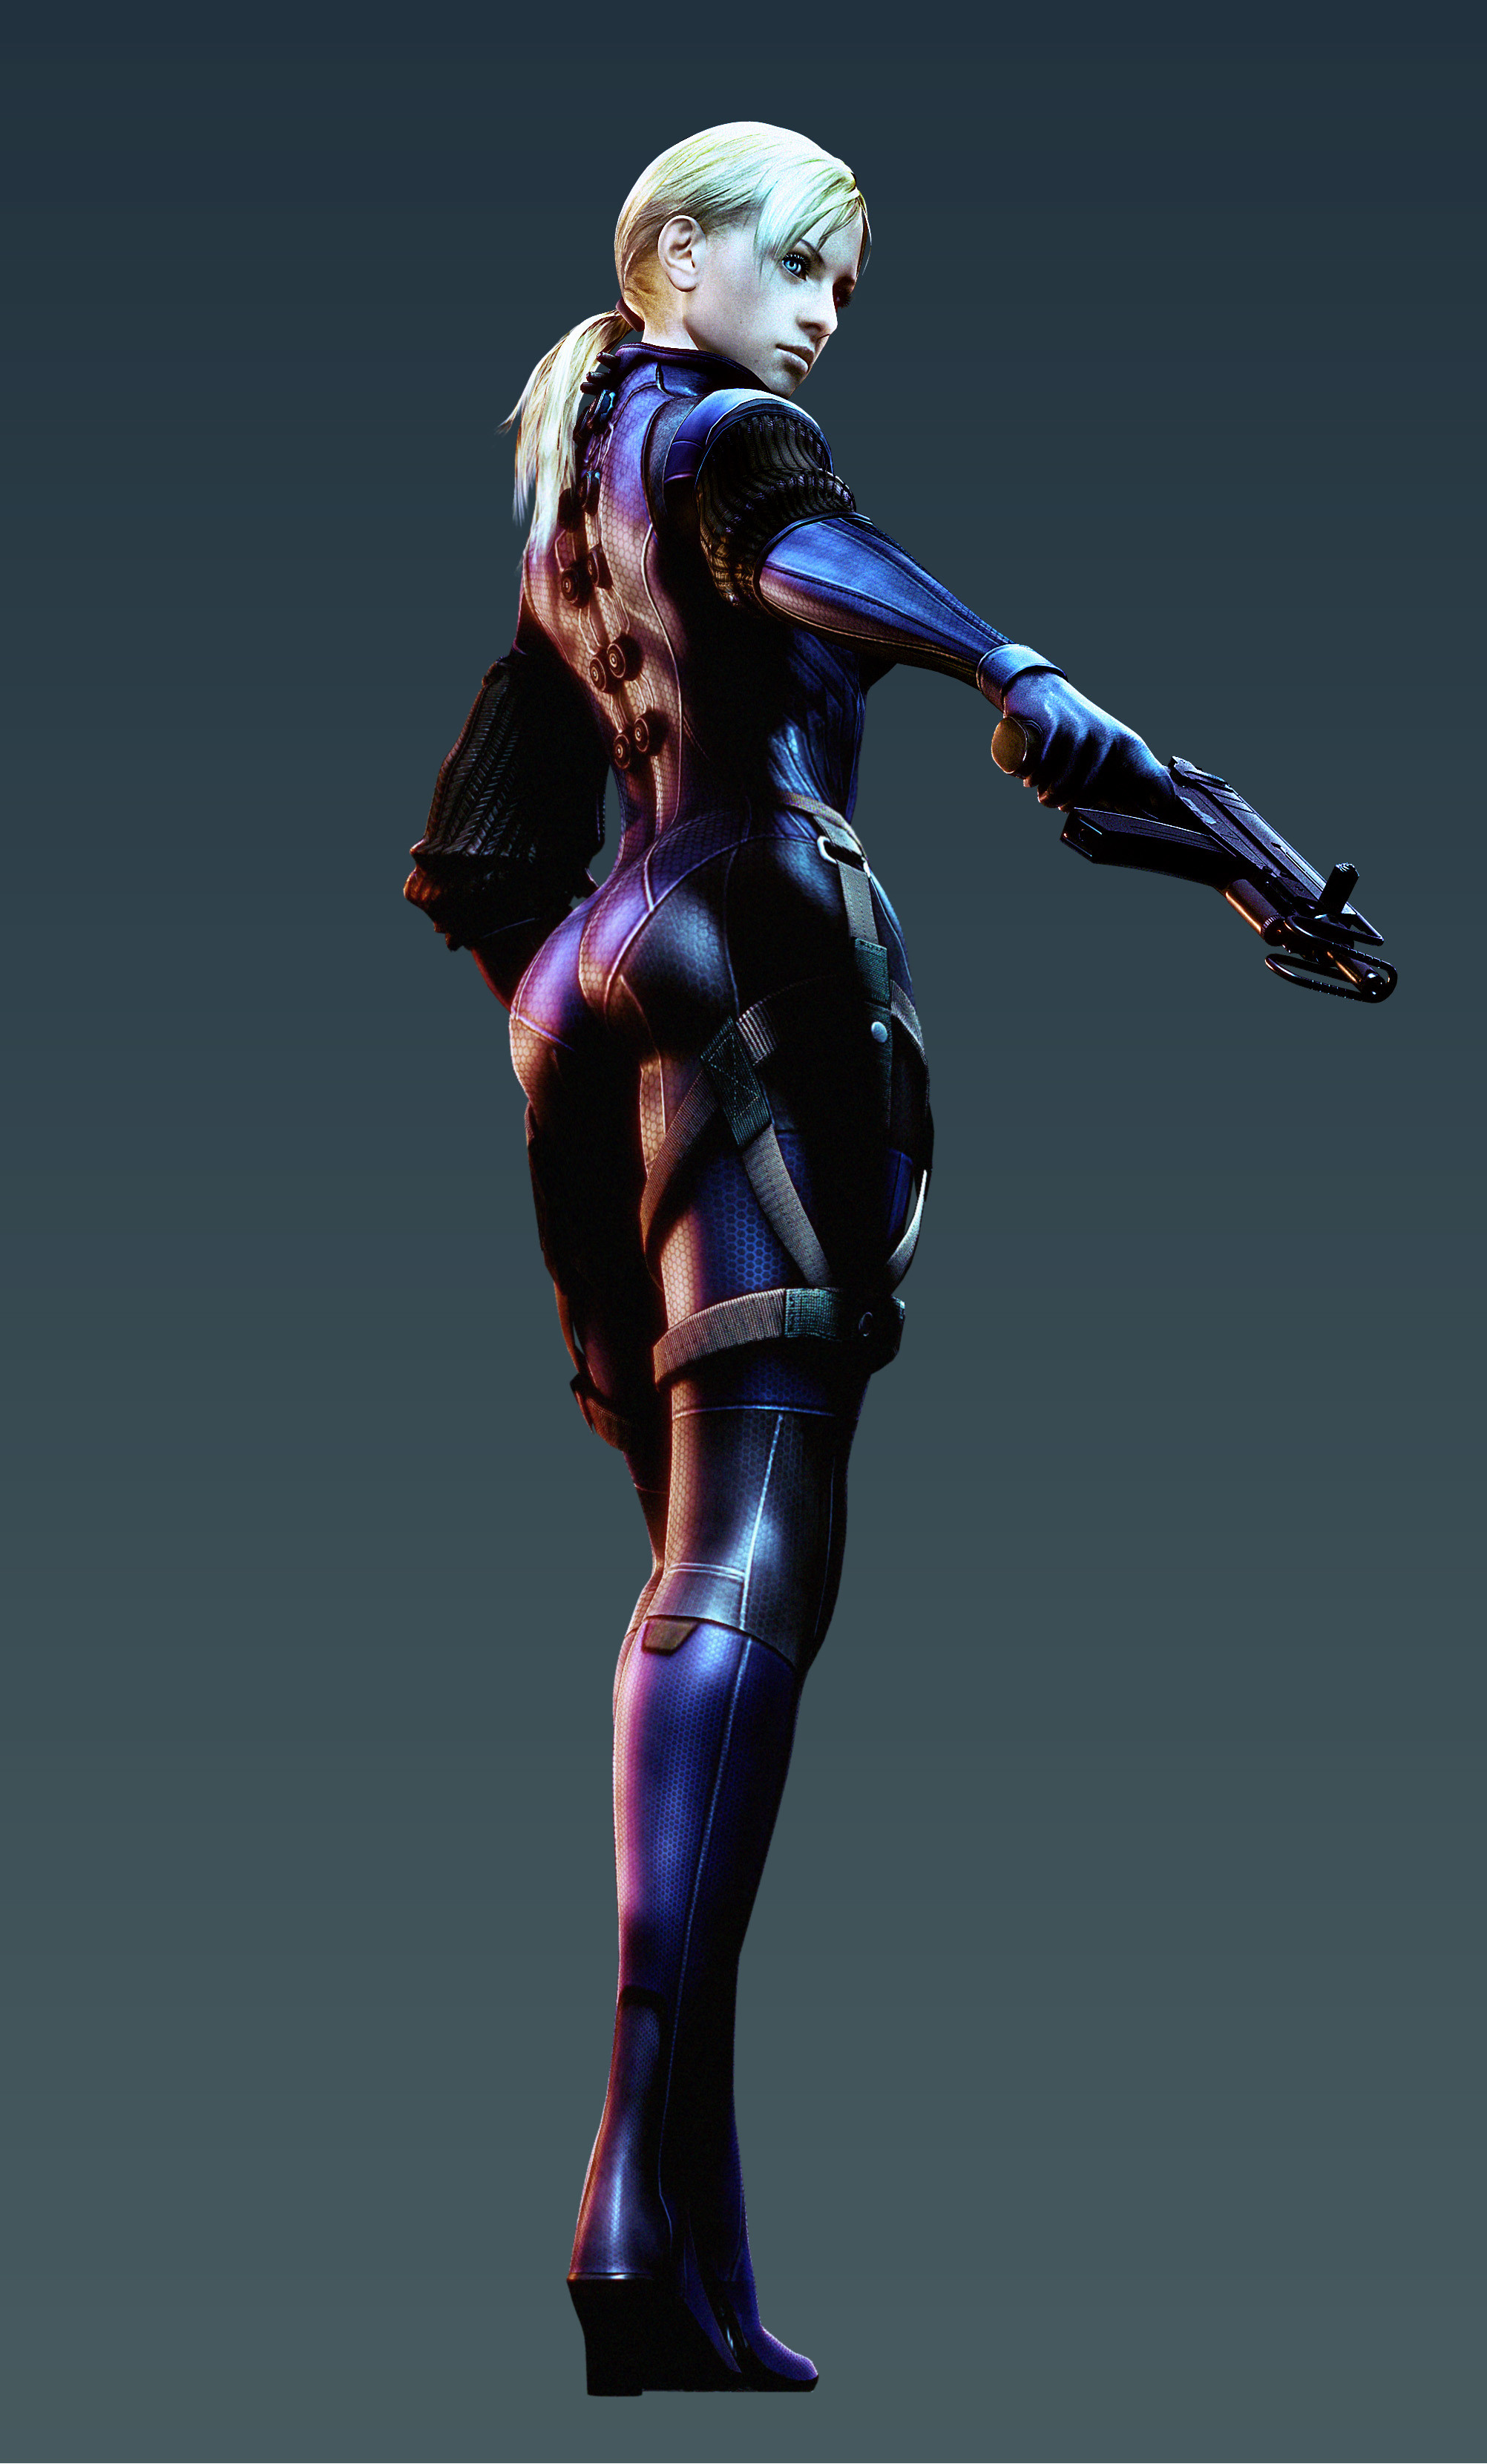 2004x3320 Jill Valentine, Resident Evil 5. I always did like that outfit!